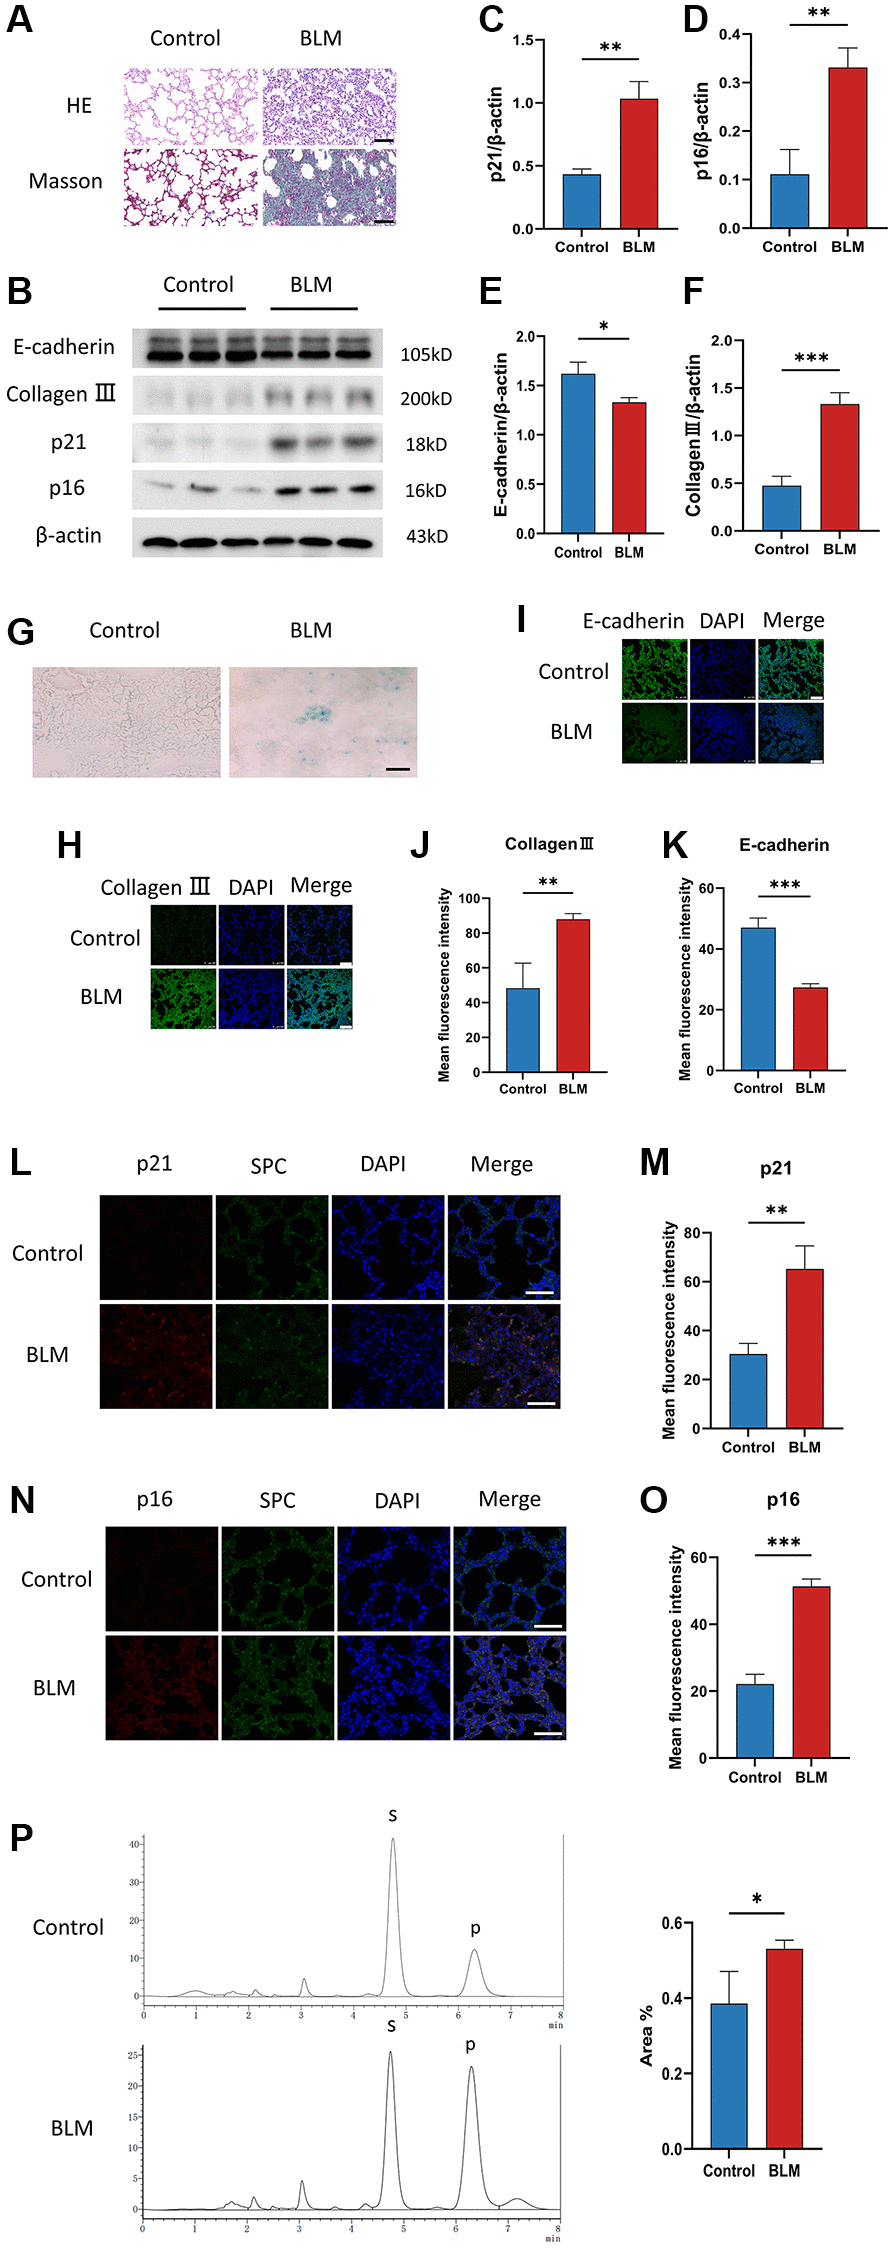 Cellular senescence occurs in BLM-induced lung fibrosis mice model. (A) HE and Masson staining reveal representative pictures of different lung tissue sections after 21 days of BLM treatment. Scale bar, 100 μm. (B–F) Western blotting using anti-E-cadherin, anti-collagen III, anti-p21, anti-p16, and anti-β-actin antibodies in mice treated with BLM or saline. The grayscale evaluations of the bands were adjusted to be equal to β-actin. Data were presented as the mean ± SD. *P t-test). **P t-test). ***P t-test). (G) SA-β-gal staining reveals representative images of different lung tissue sections. Scale bar, 100 μm. (H–K) The protein levels of collagen III and E-cadherin in different lung tissues were measured via immunofluorescence technique. DAPI was used to counterstain the nuclei. Scale bar 100 μm. Data were presented as the mean ± SD. **P t-test). ***P t-test). (L–O) Representative immunofluorescence shows colocalization of p21WAF1 or p16ink4a (Red) and SPC (Green) in lung tissue. DAPI was used to counterstain the nuclei. Scale bar, 50 μm. Data were presented as the mean ± SD. **P t-test). ***P t-test). (P) High performance liquid chromatography shows FUT8 activity in mice. Data are the percentage of the area of P divided by the area of S+P and presented as the mean ± SD. P is the fucosylation product, and S is the peptide substrate. *P t-test).